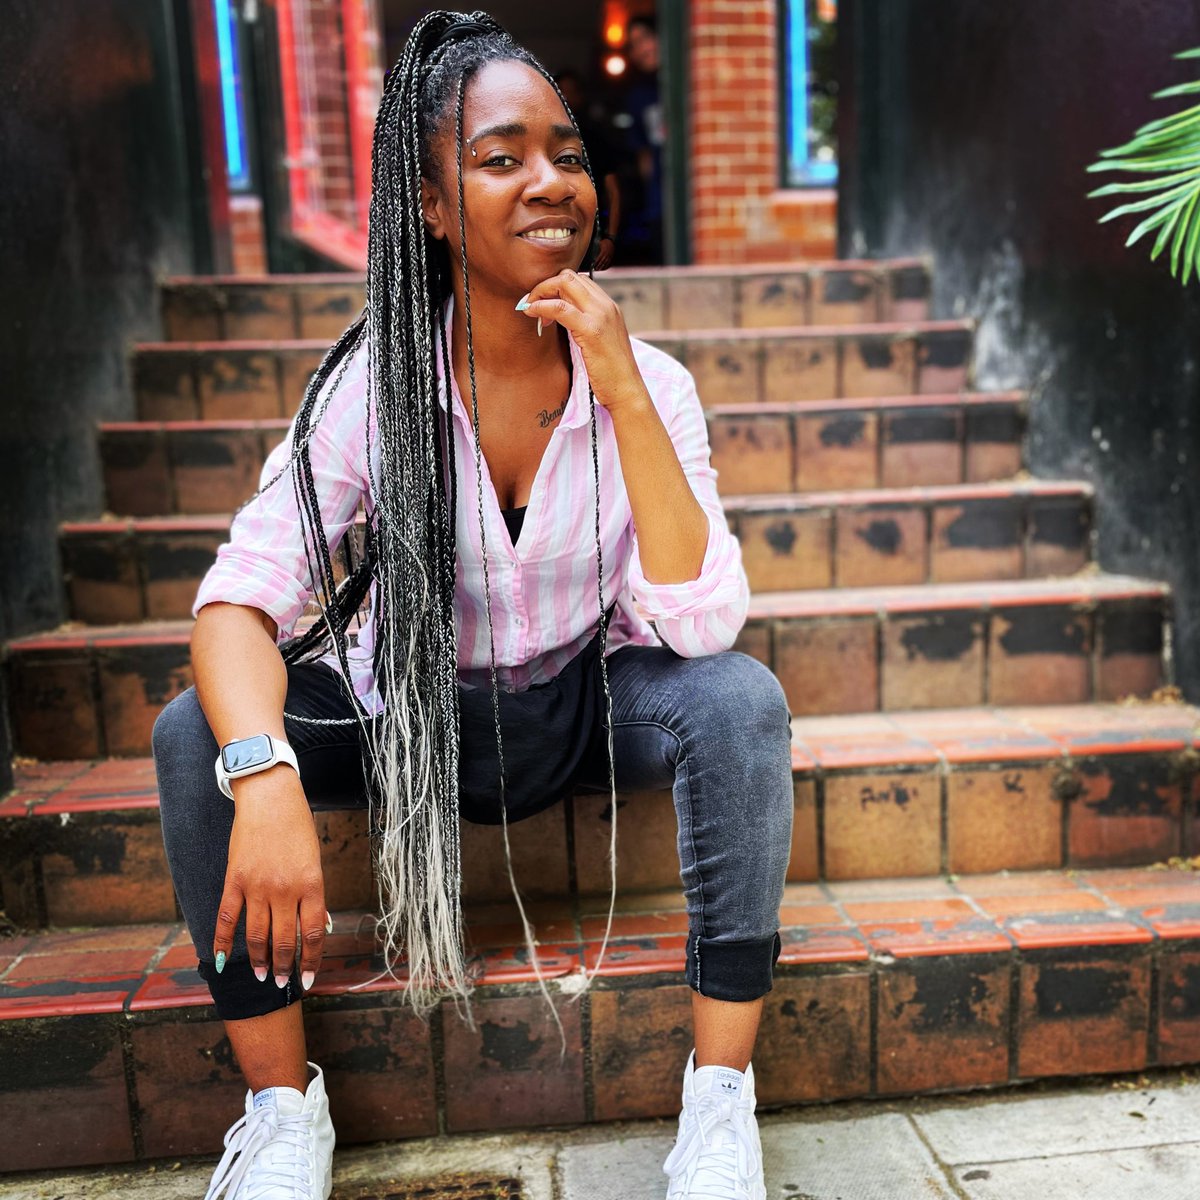 I’ve got so many reasons to smile......
.
.
.
#melanin #relationshipgoals #blogger #lgbtfashion #lgbt  #portraitphotography #fashionstyle #fyp #casualstyle #braids #ombrehair #asos #addidas #fashionoftheday #influencer #yummymummy #maturemodel #blackqueen #blkphotographylondon